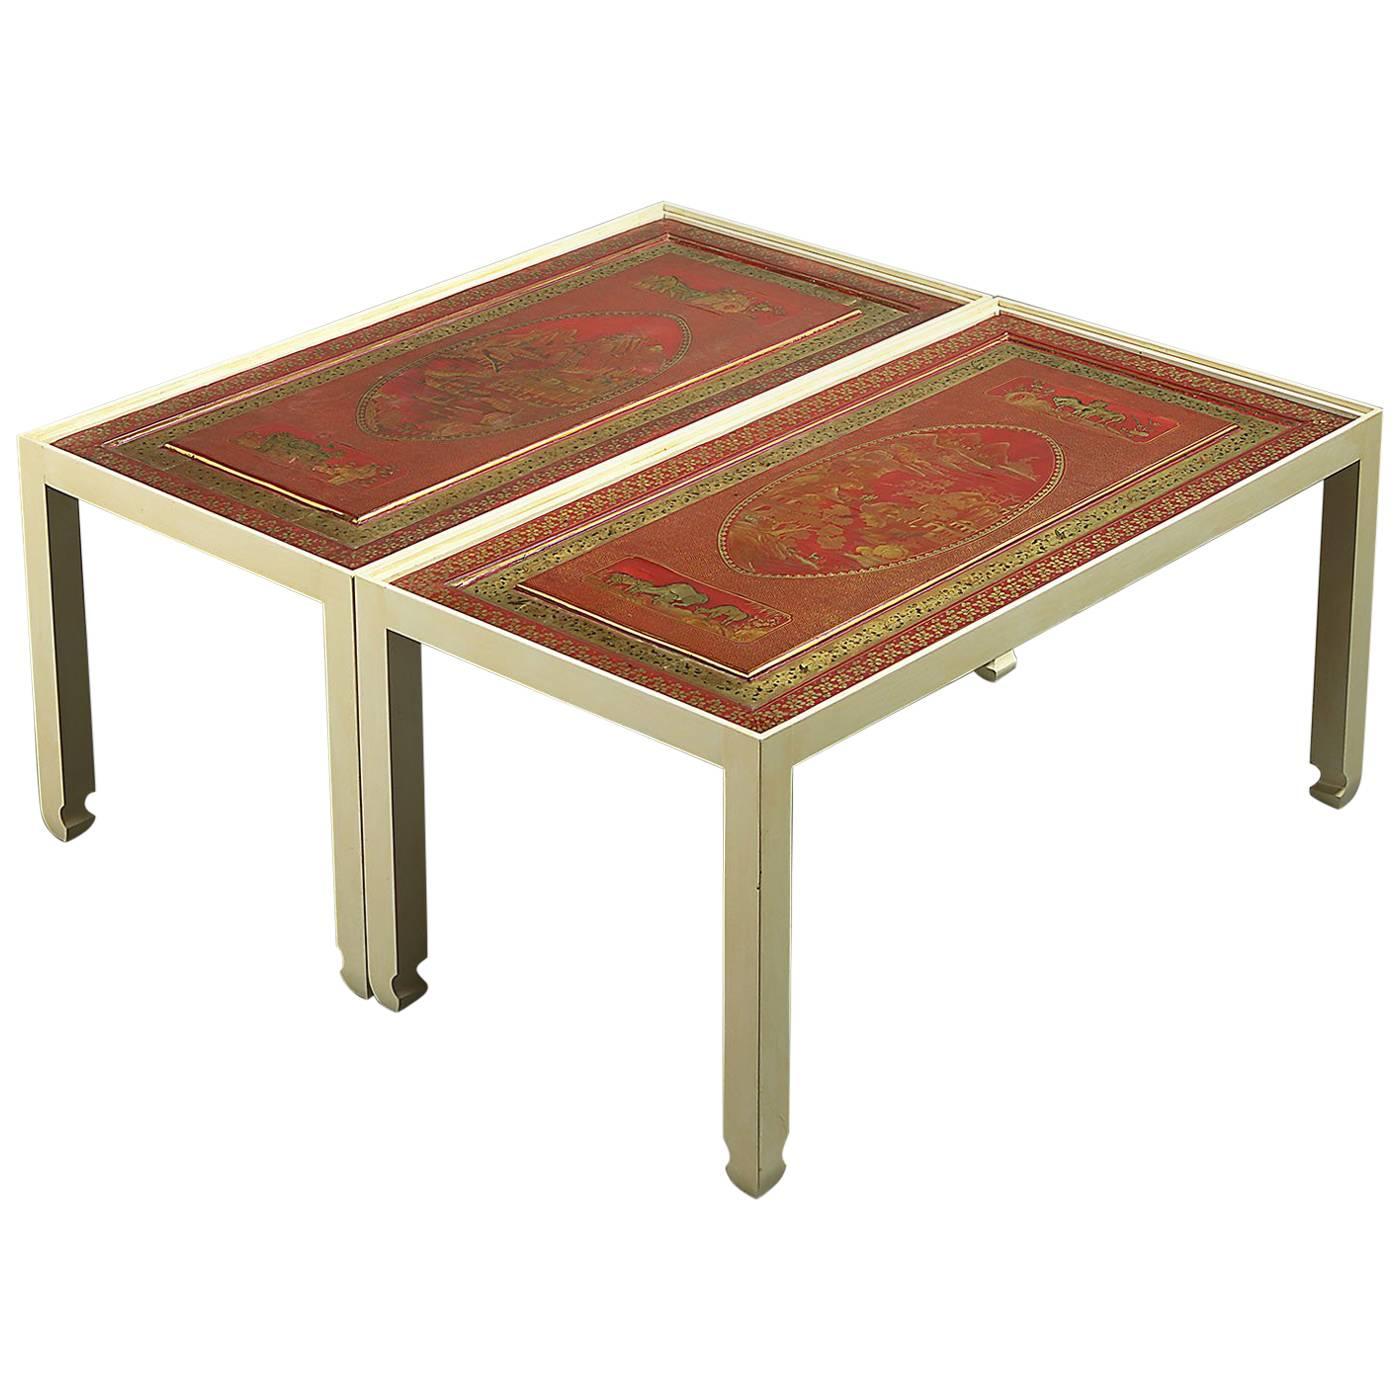 Fine Pair of Red Lacquer Panels as Low Tables